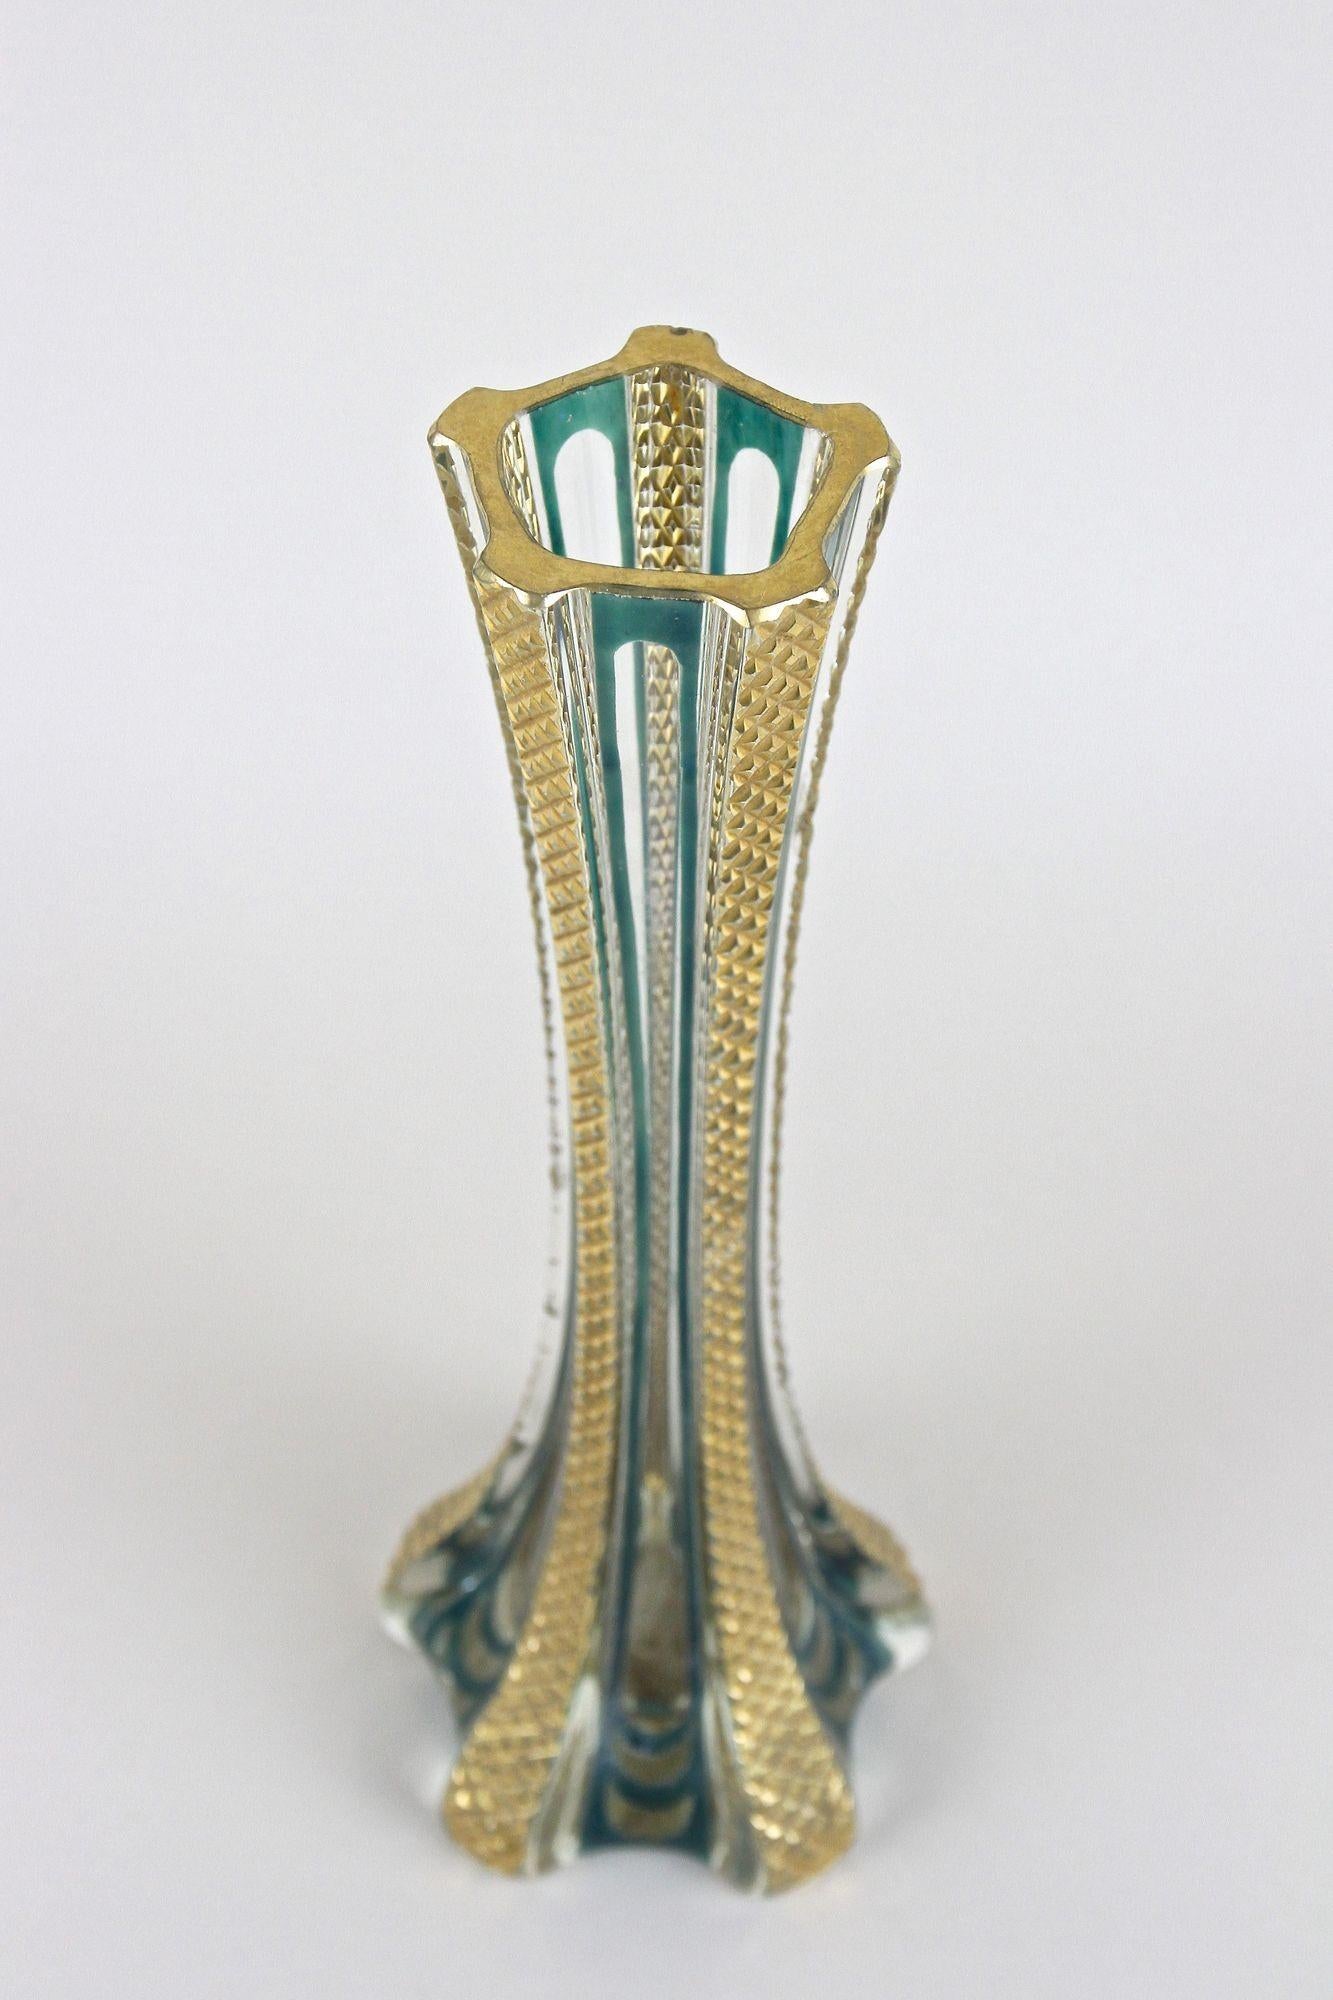 Murano Glass Vase With Gold Accents, Early 20th Century - Italy ca. 1930 For Sale 5